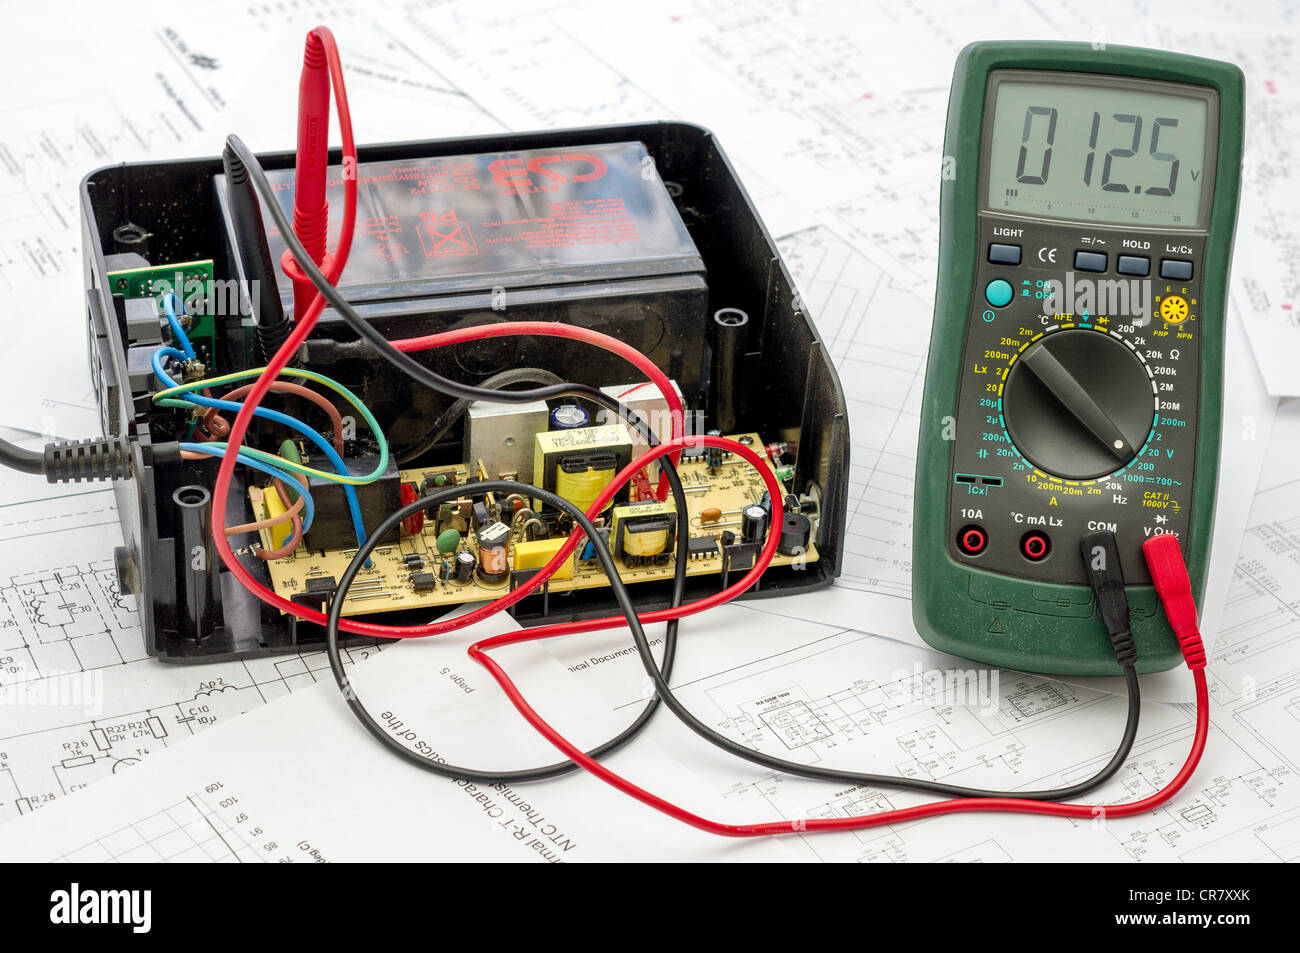 Testing old battery voltage with digital multimeter Stock Photo